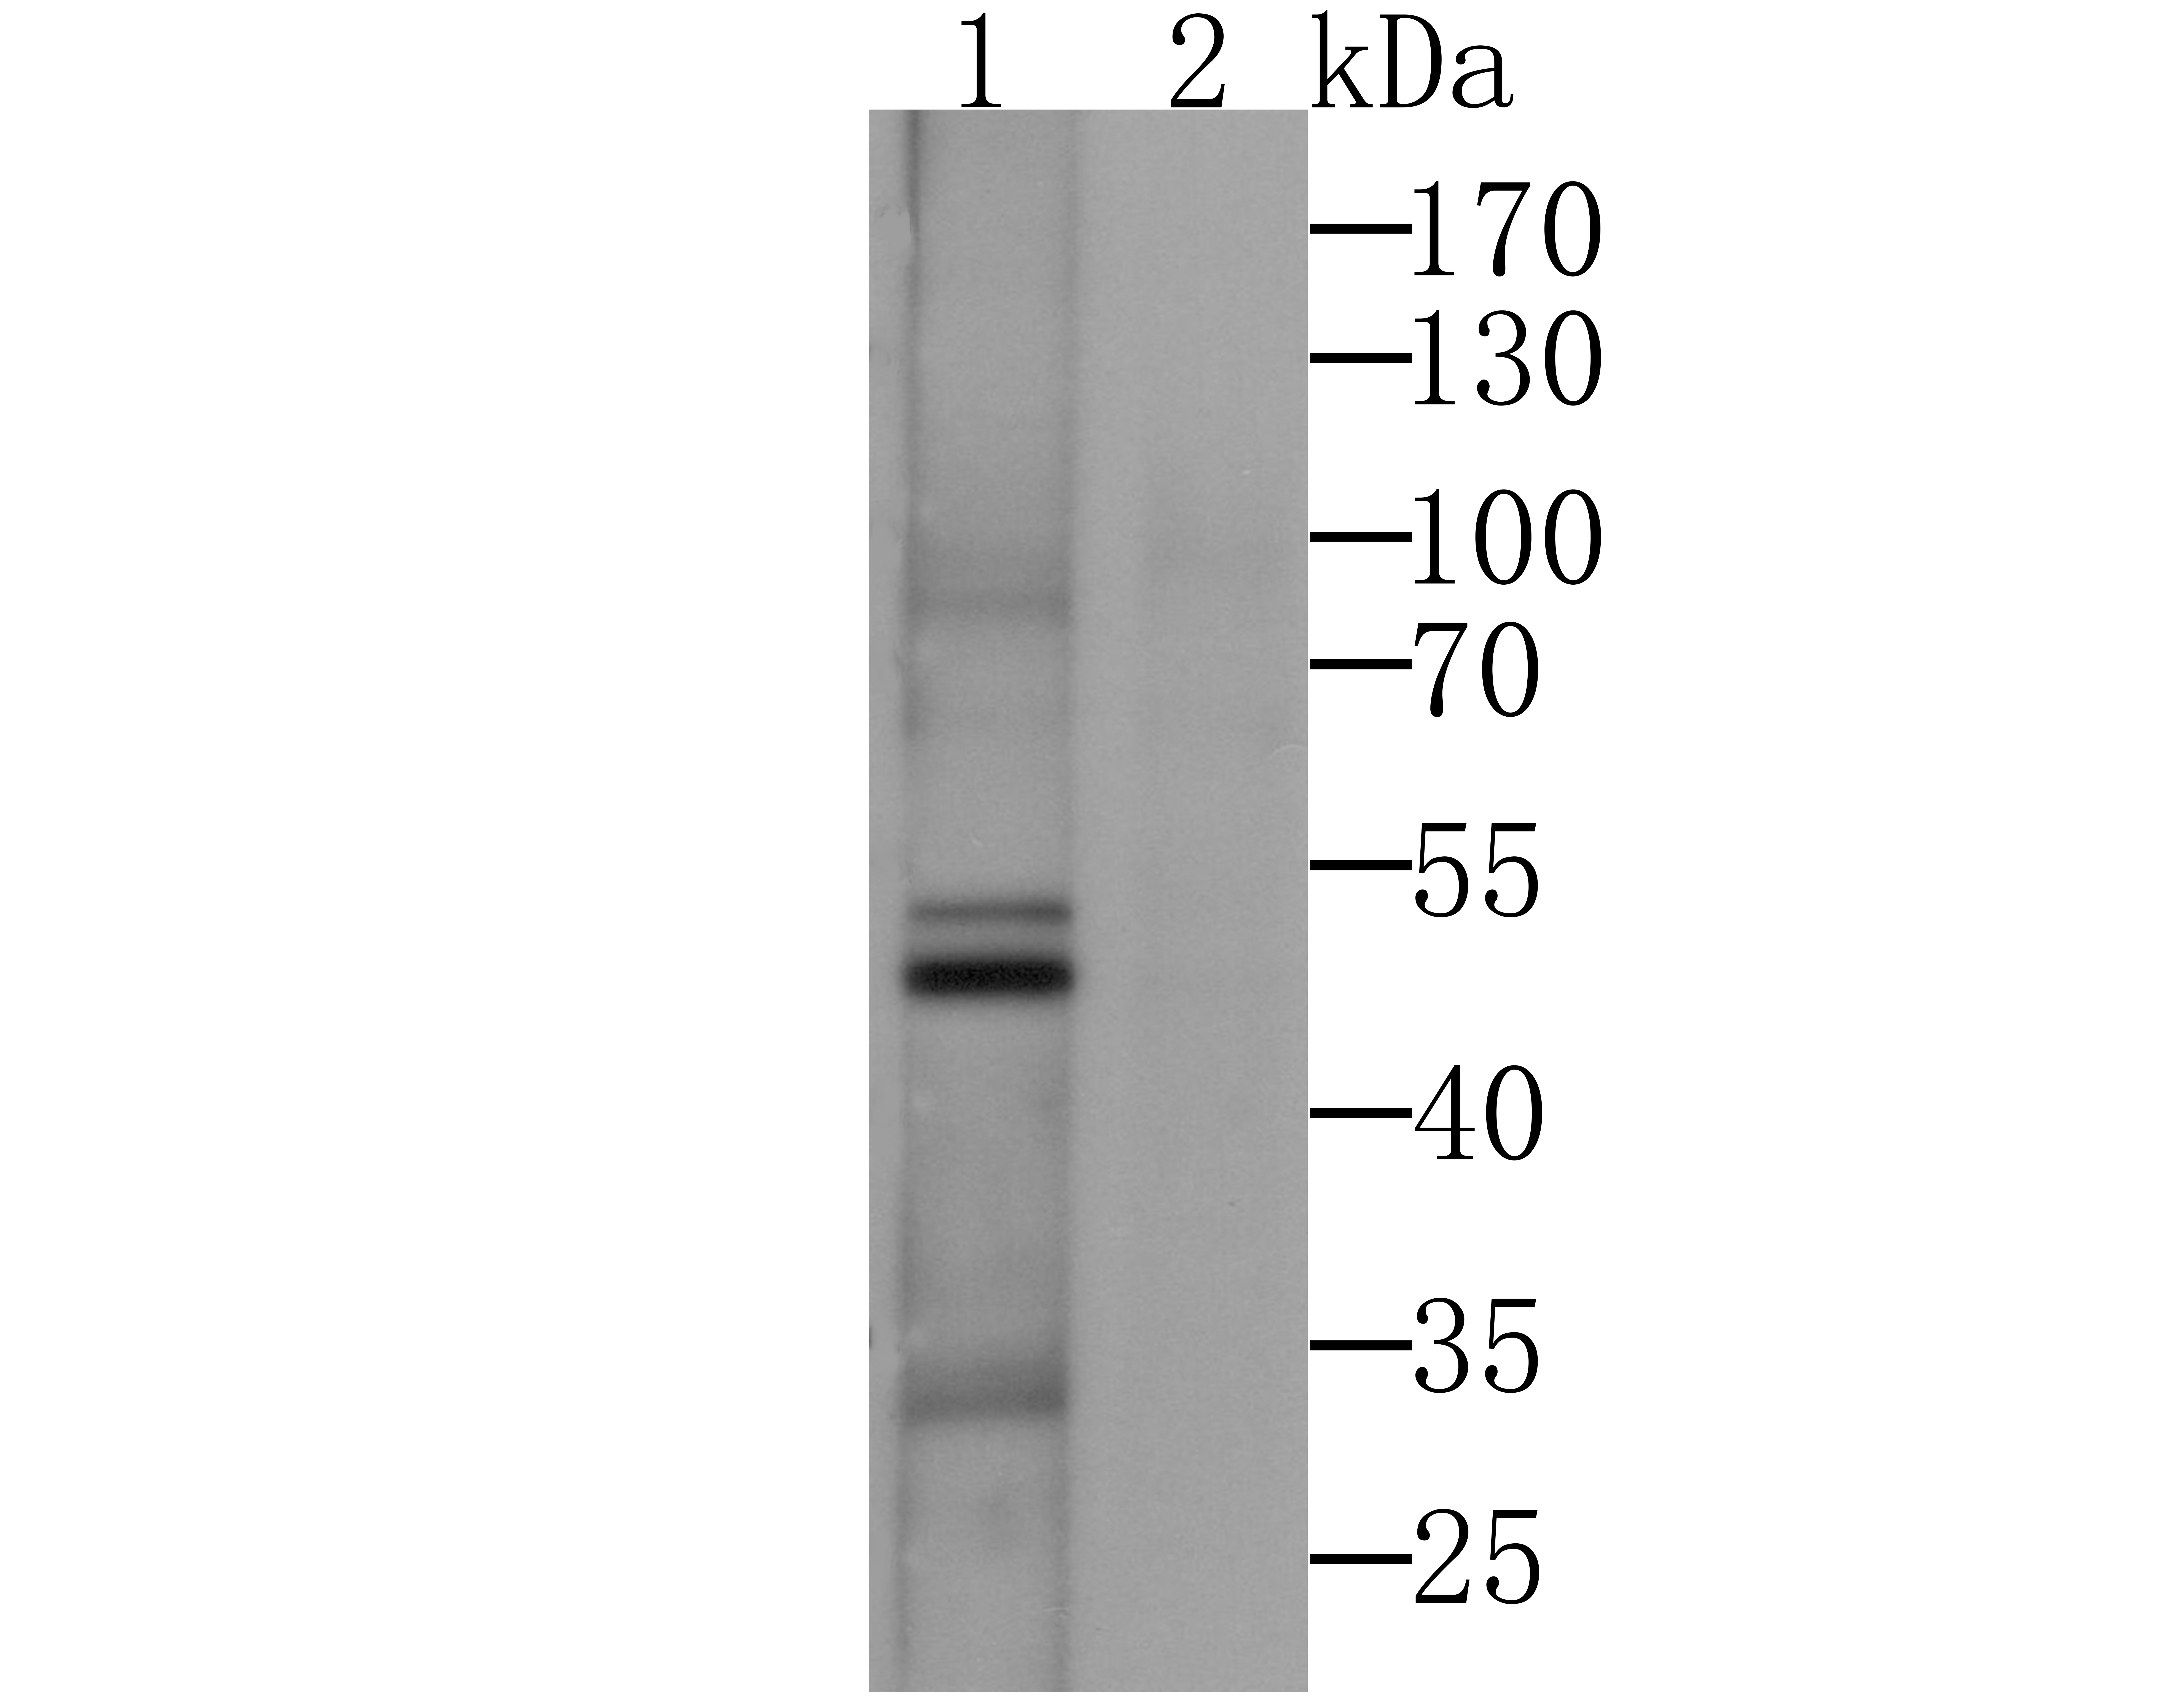 Western blot analysis of CACNG3 on SH-SY-5Y cell lysates using anti-CACNG3 antibody.<br />
  Lane 1: Anti-CACNG3 Antibody (1:500). <br />
  Lane 2: Anti-CACNG3 Antibody, pre-incubated with the immunizaiton peptide.